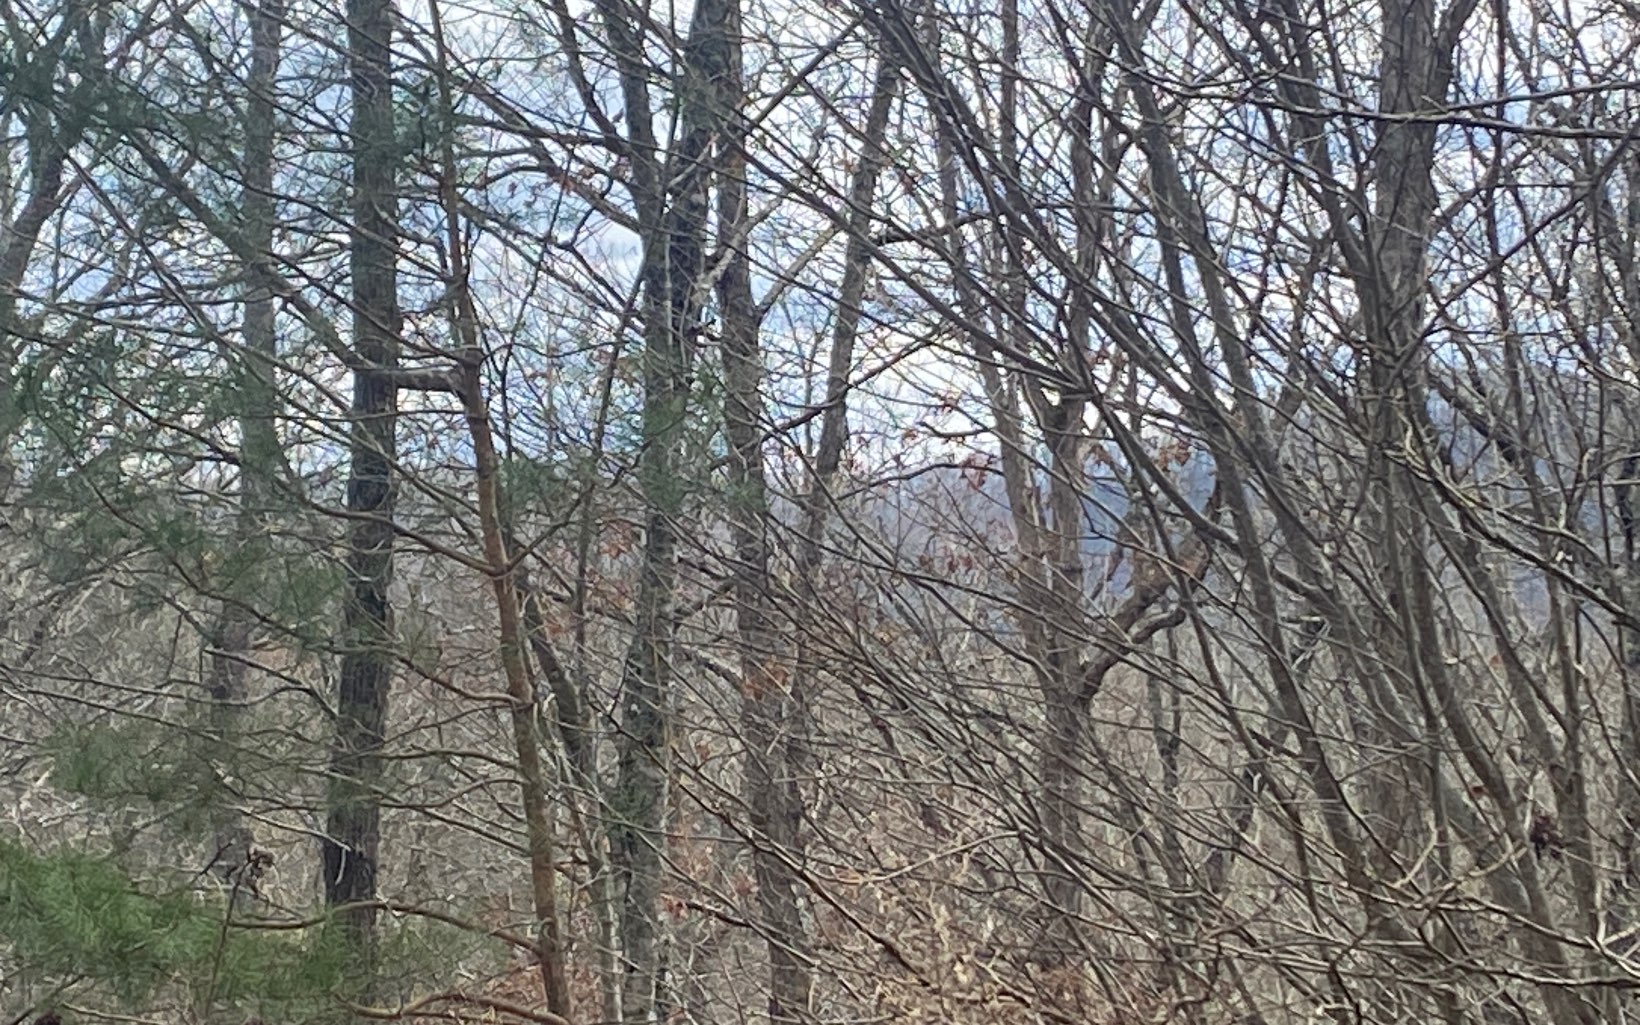 1.39 acres, wooded with a nice view waiting to be uncovered. Lot offers privacy nestled among the mountain laurel & trees.This community is minutes from Lake Nottely & conveniently located between Blue Ridge, Blairsville & Murphy NC. All paved roads, under ground utilities, Cable Television, & Public Water.